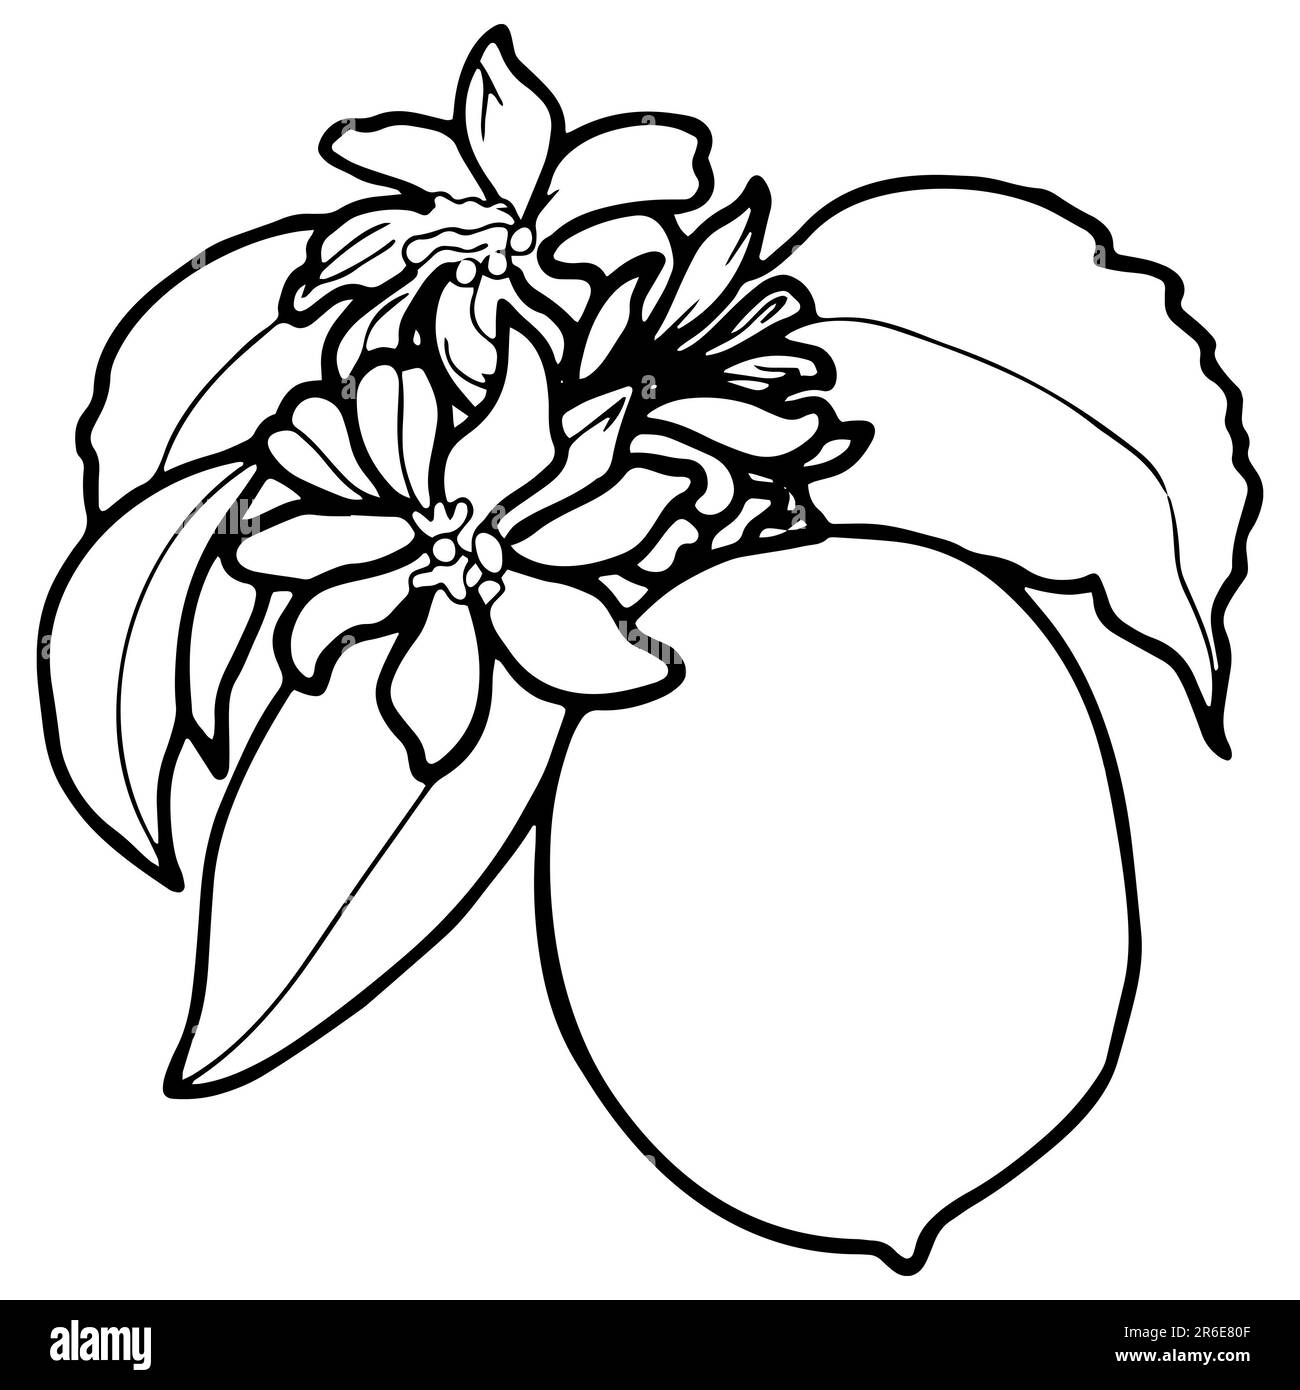 Contour drawing of lemon with leaves and flowers. JPEG hand drawn botanical illustration. Stock Photo